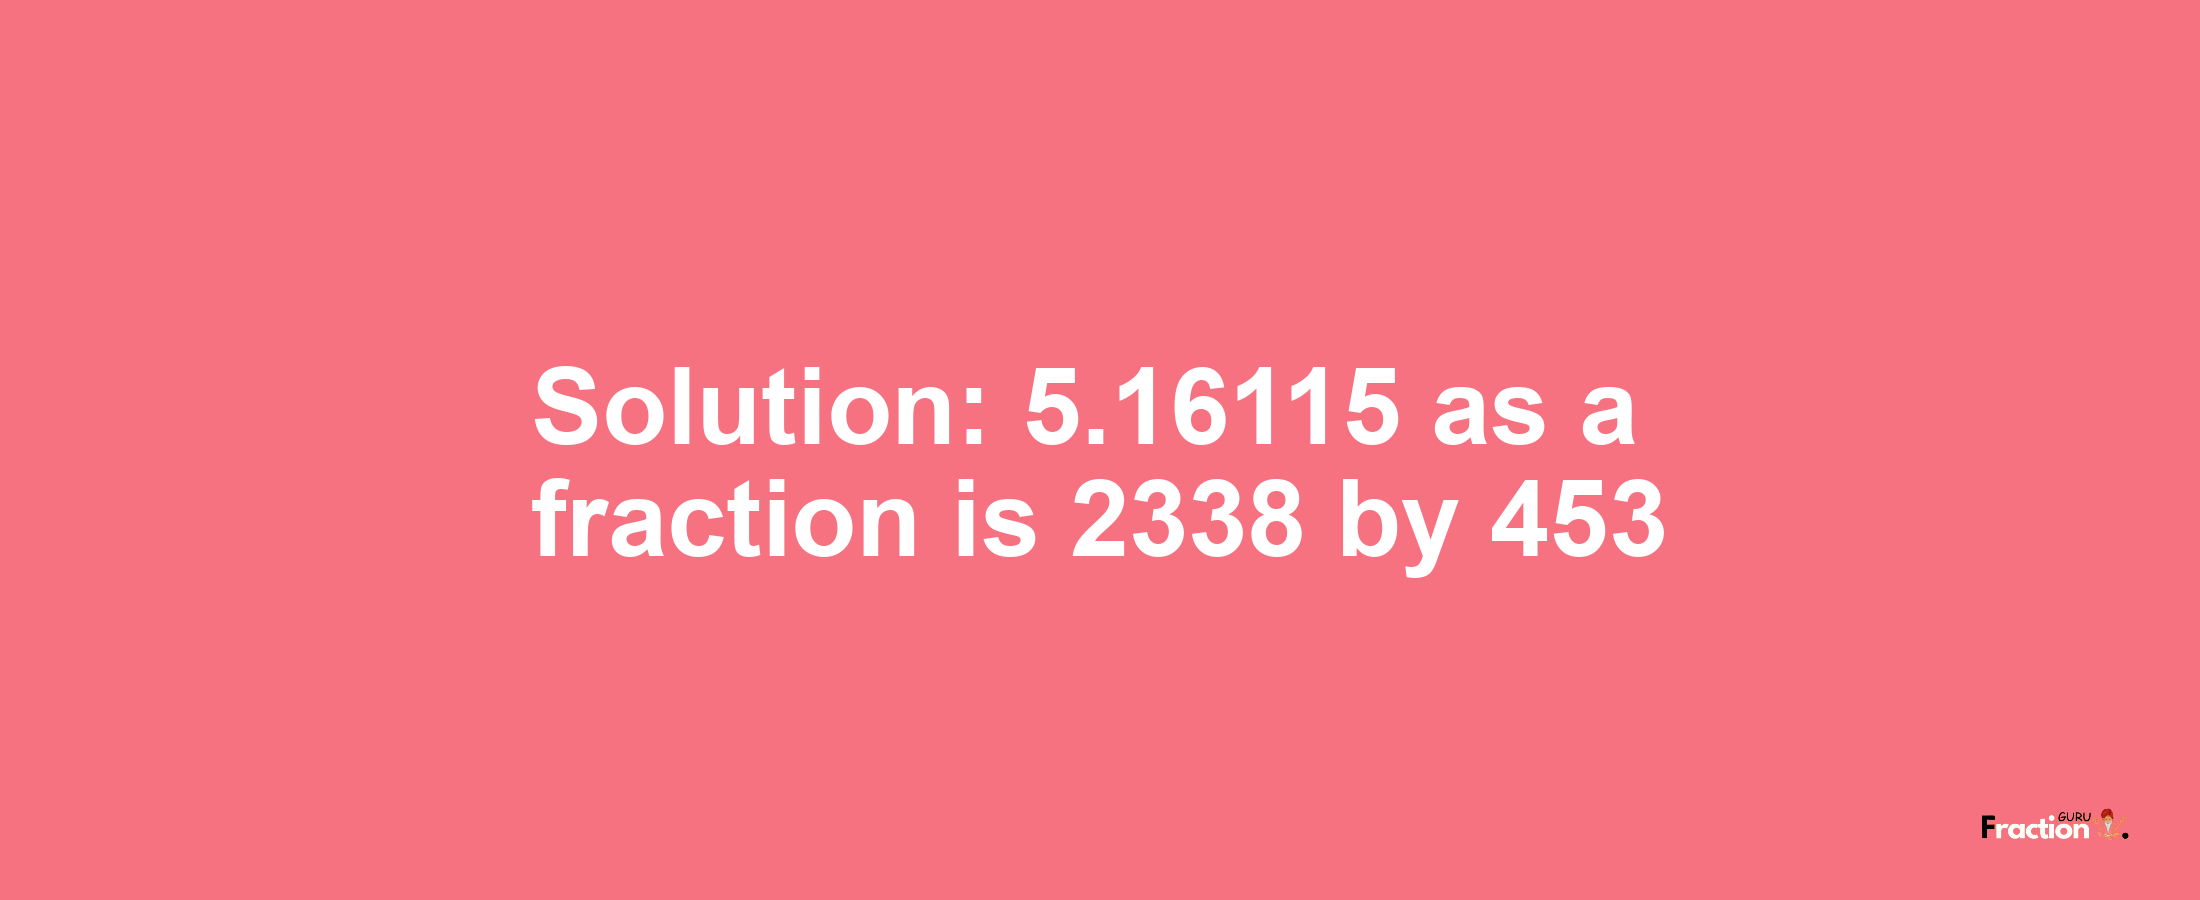 Solution:5.16115 as a fraction is 2338/453